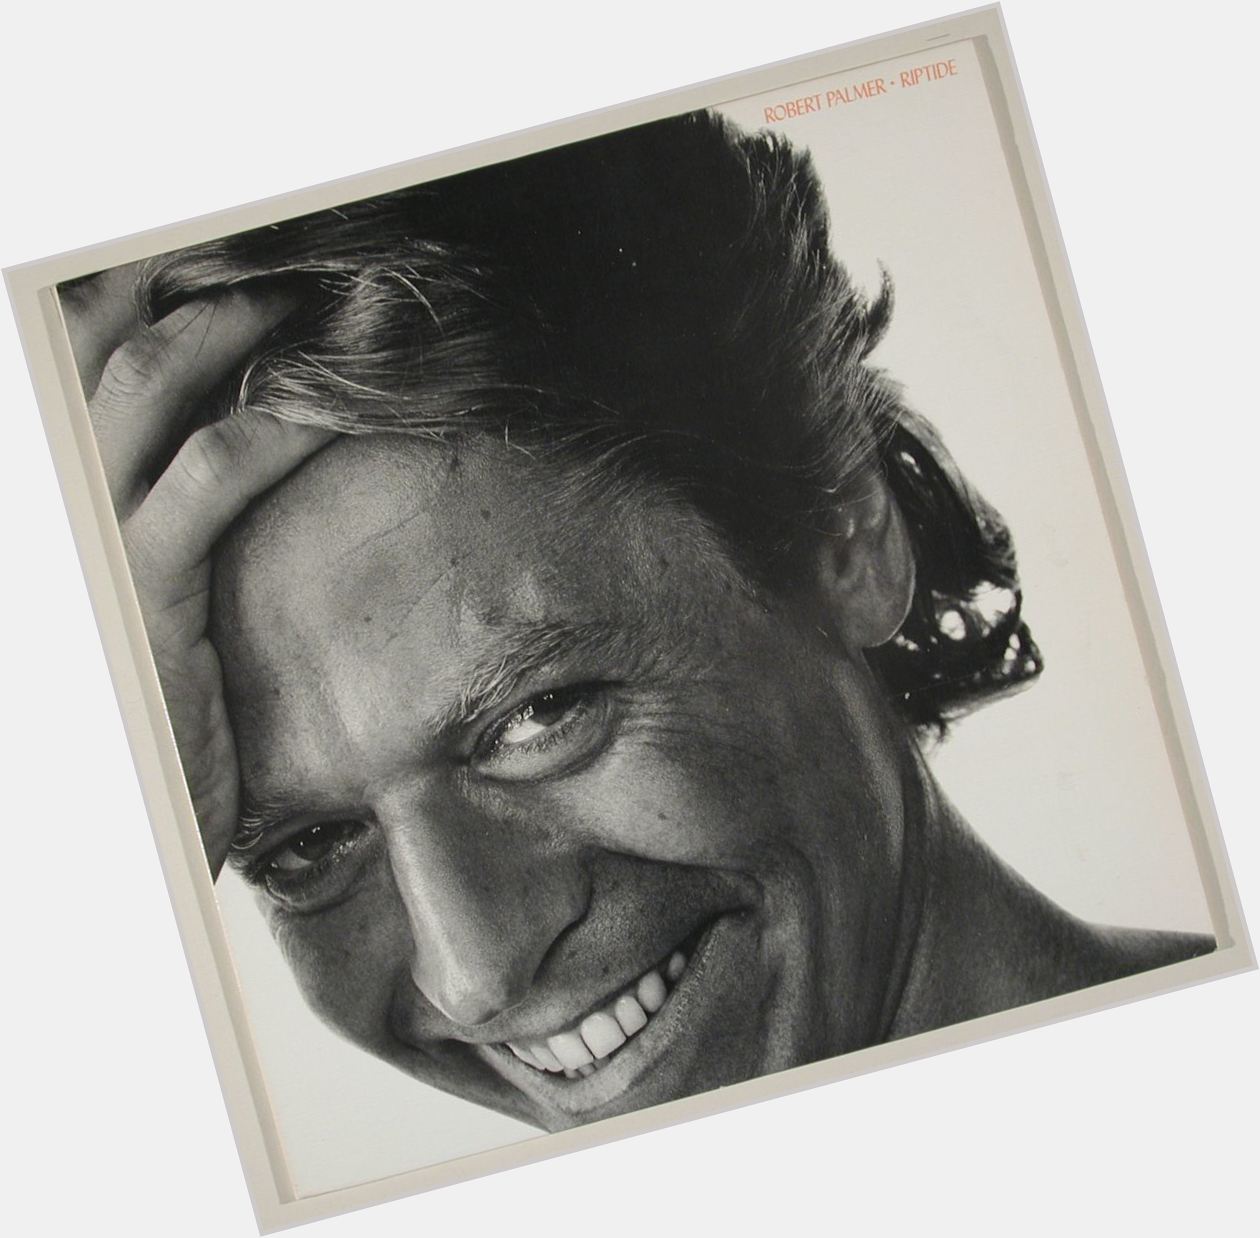 Robert Palmer would have been 66 years old today. Happy Birthday and 